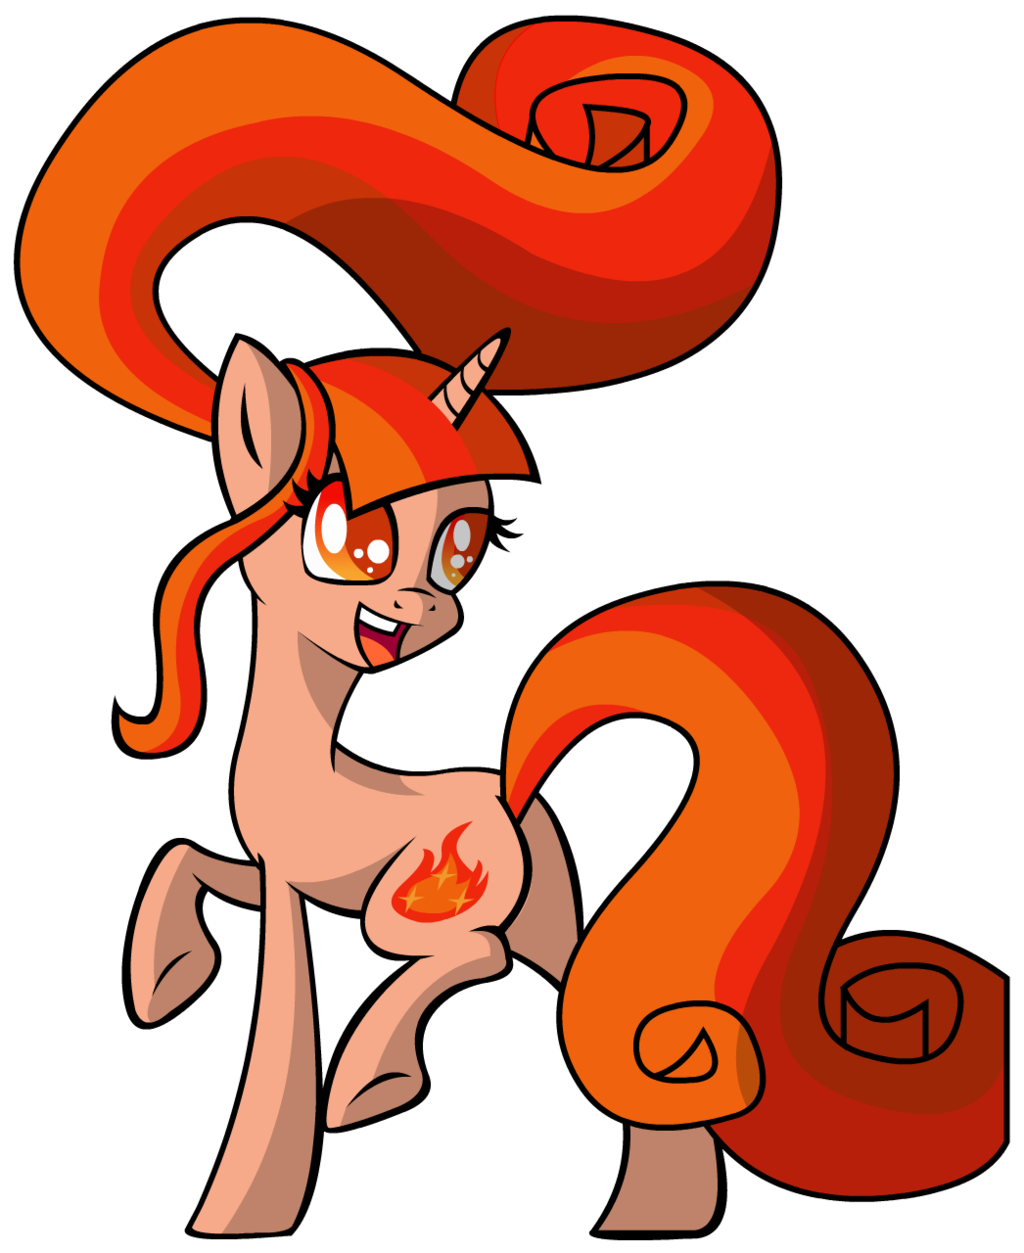 Starryflame Comic Style Commission by Lightning-Bliss on DeviantArt